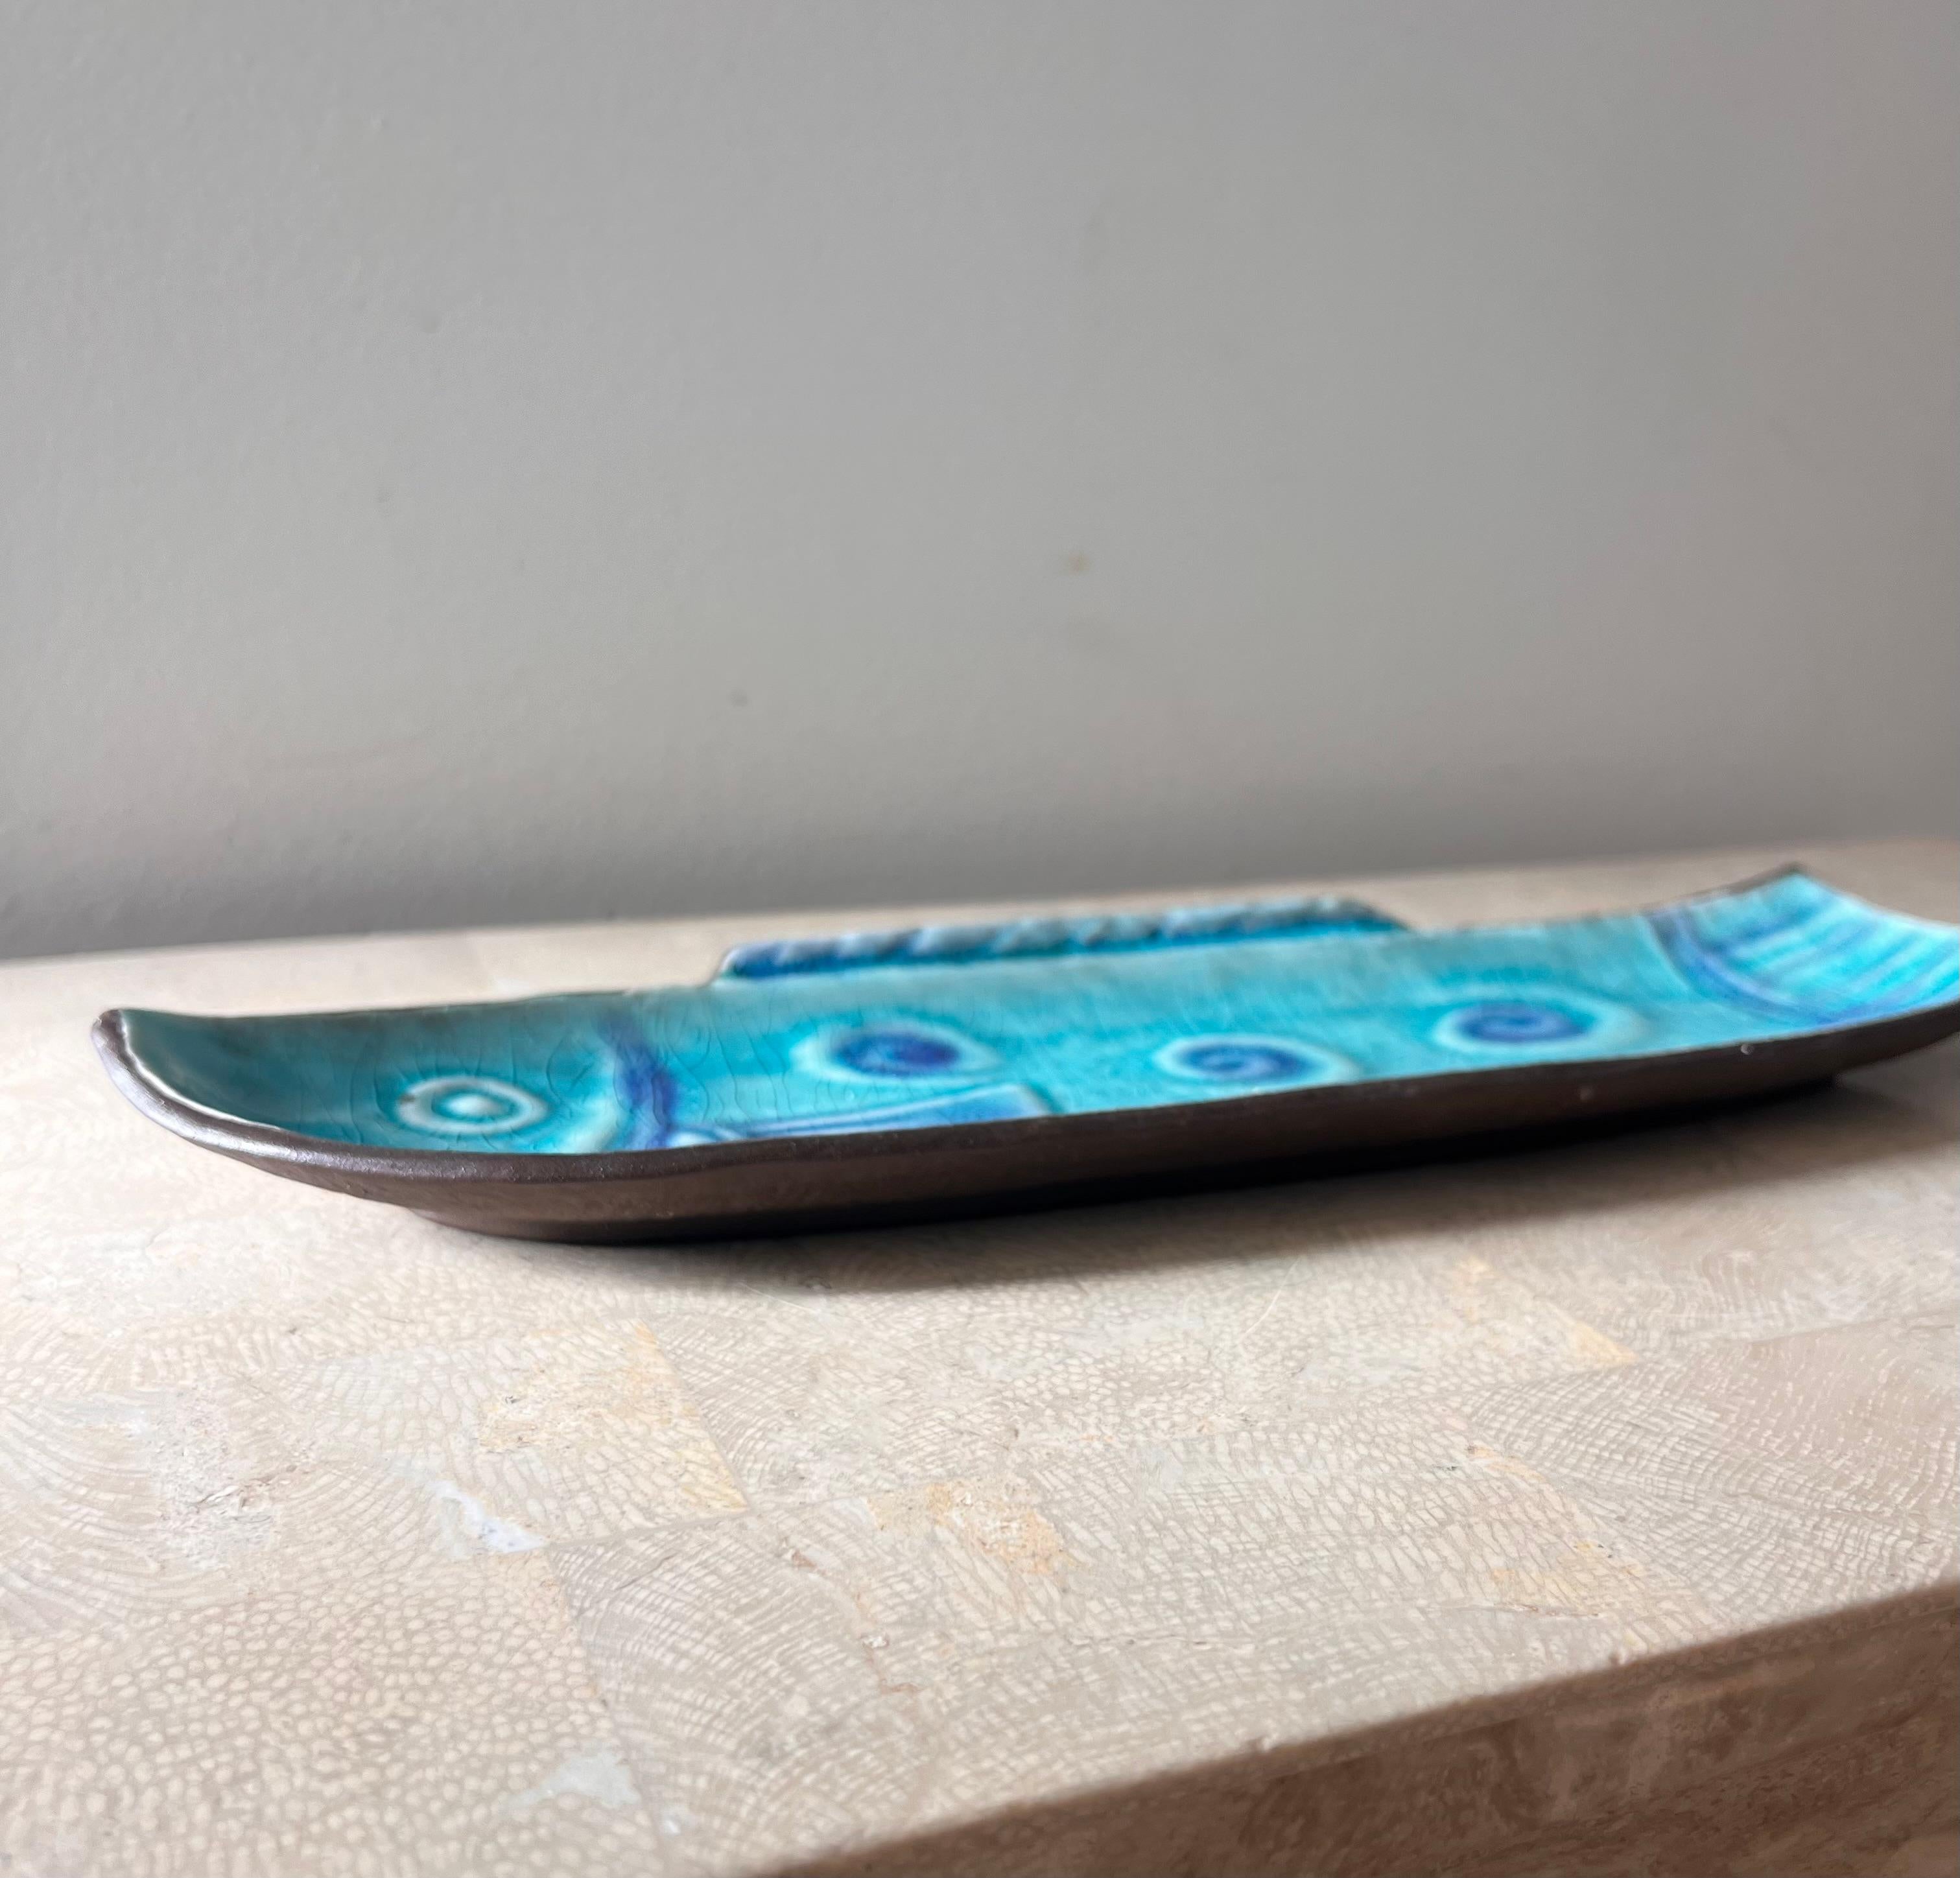 A vintage Japanese glazed ceramic fish platter, circa late 1960s. Tones of Yves Klein and swimming pool blues. The “crackle” ceramic technique shines here. Few signs of age. Pick up in central west Los Angeles or we ship worldwide. 
13.5” W x 4” D x